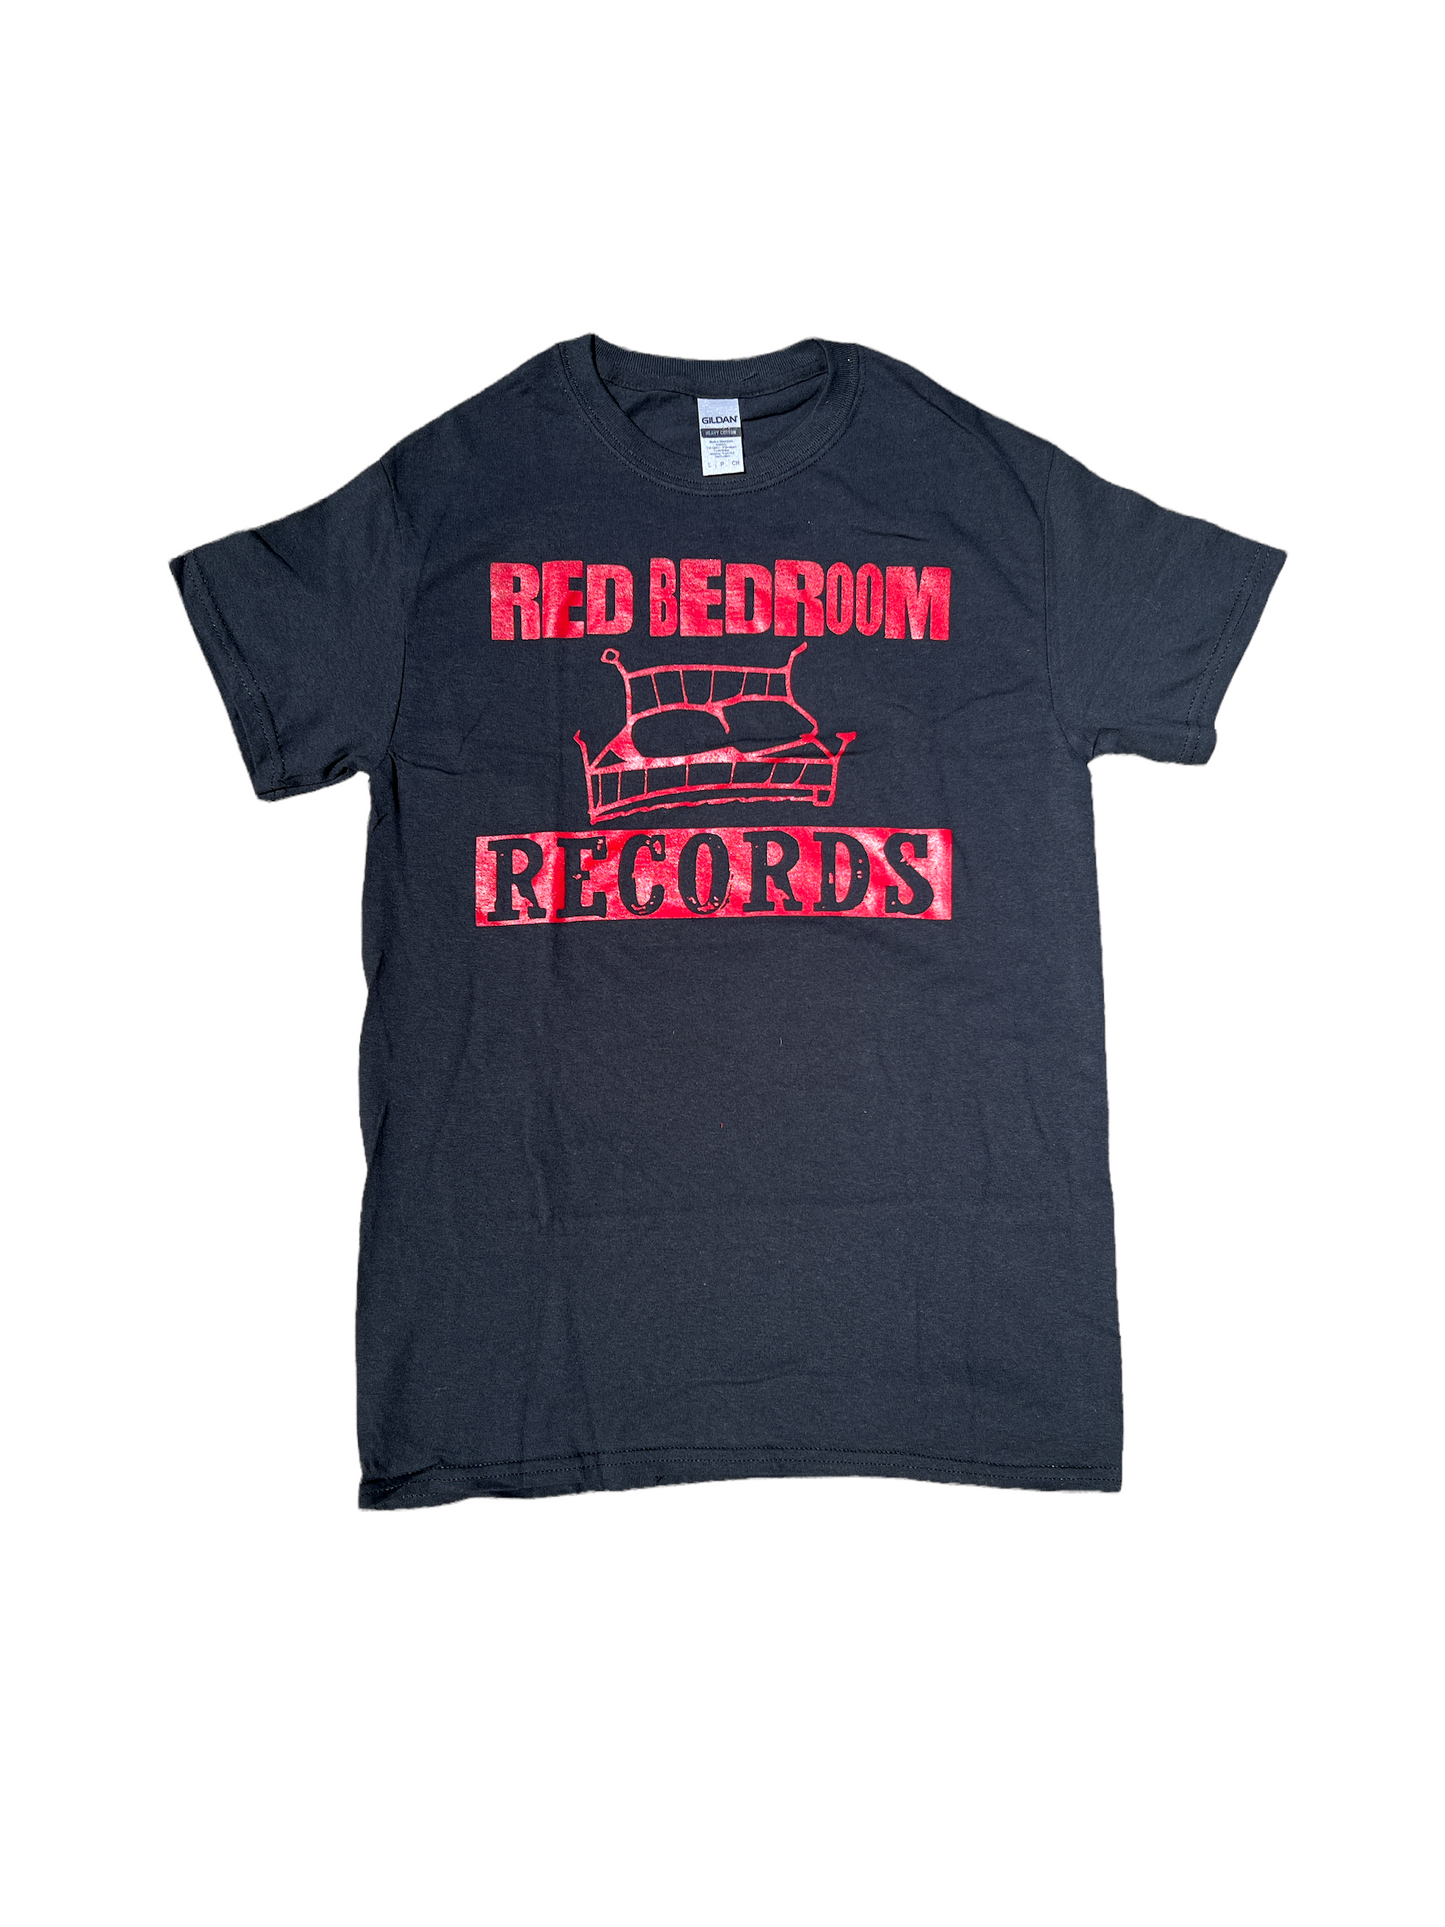 Red Bedroom Record OTH - T Shirt - Black